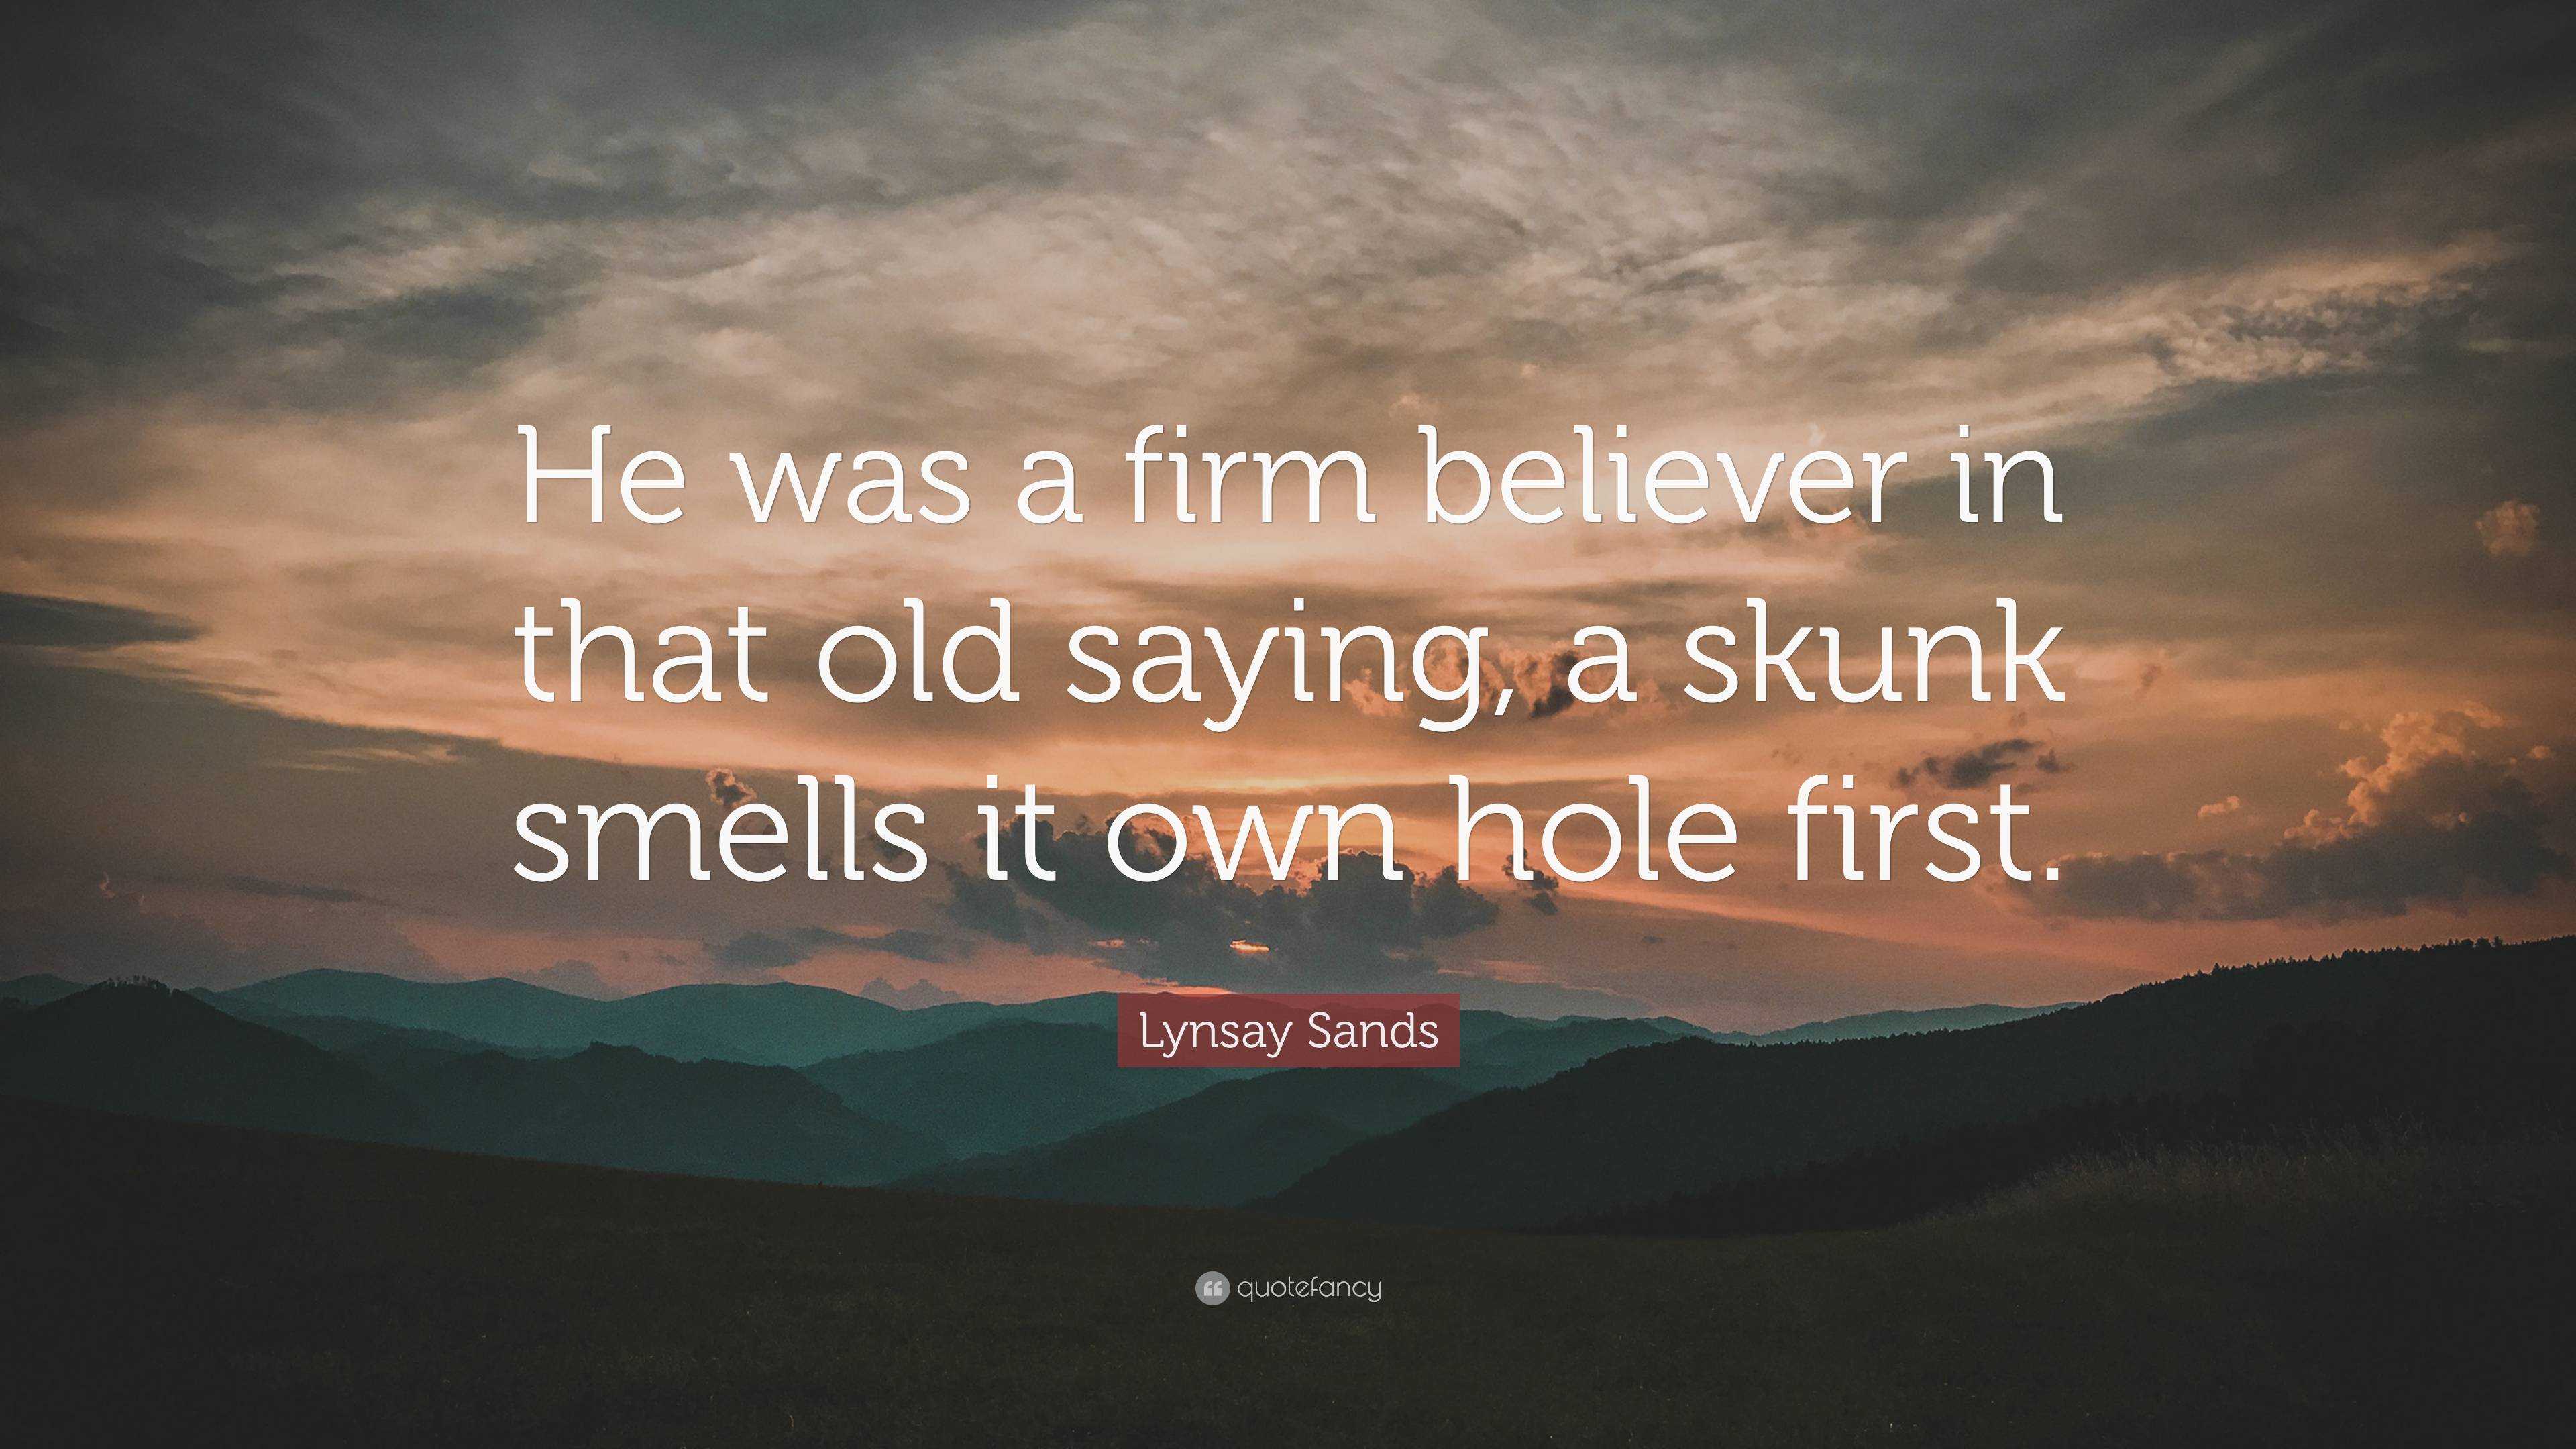 6928617-Lynsay-Sands-Quote-He-was-a-firm-believer-in-that-old-saying-a.jpg